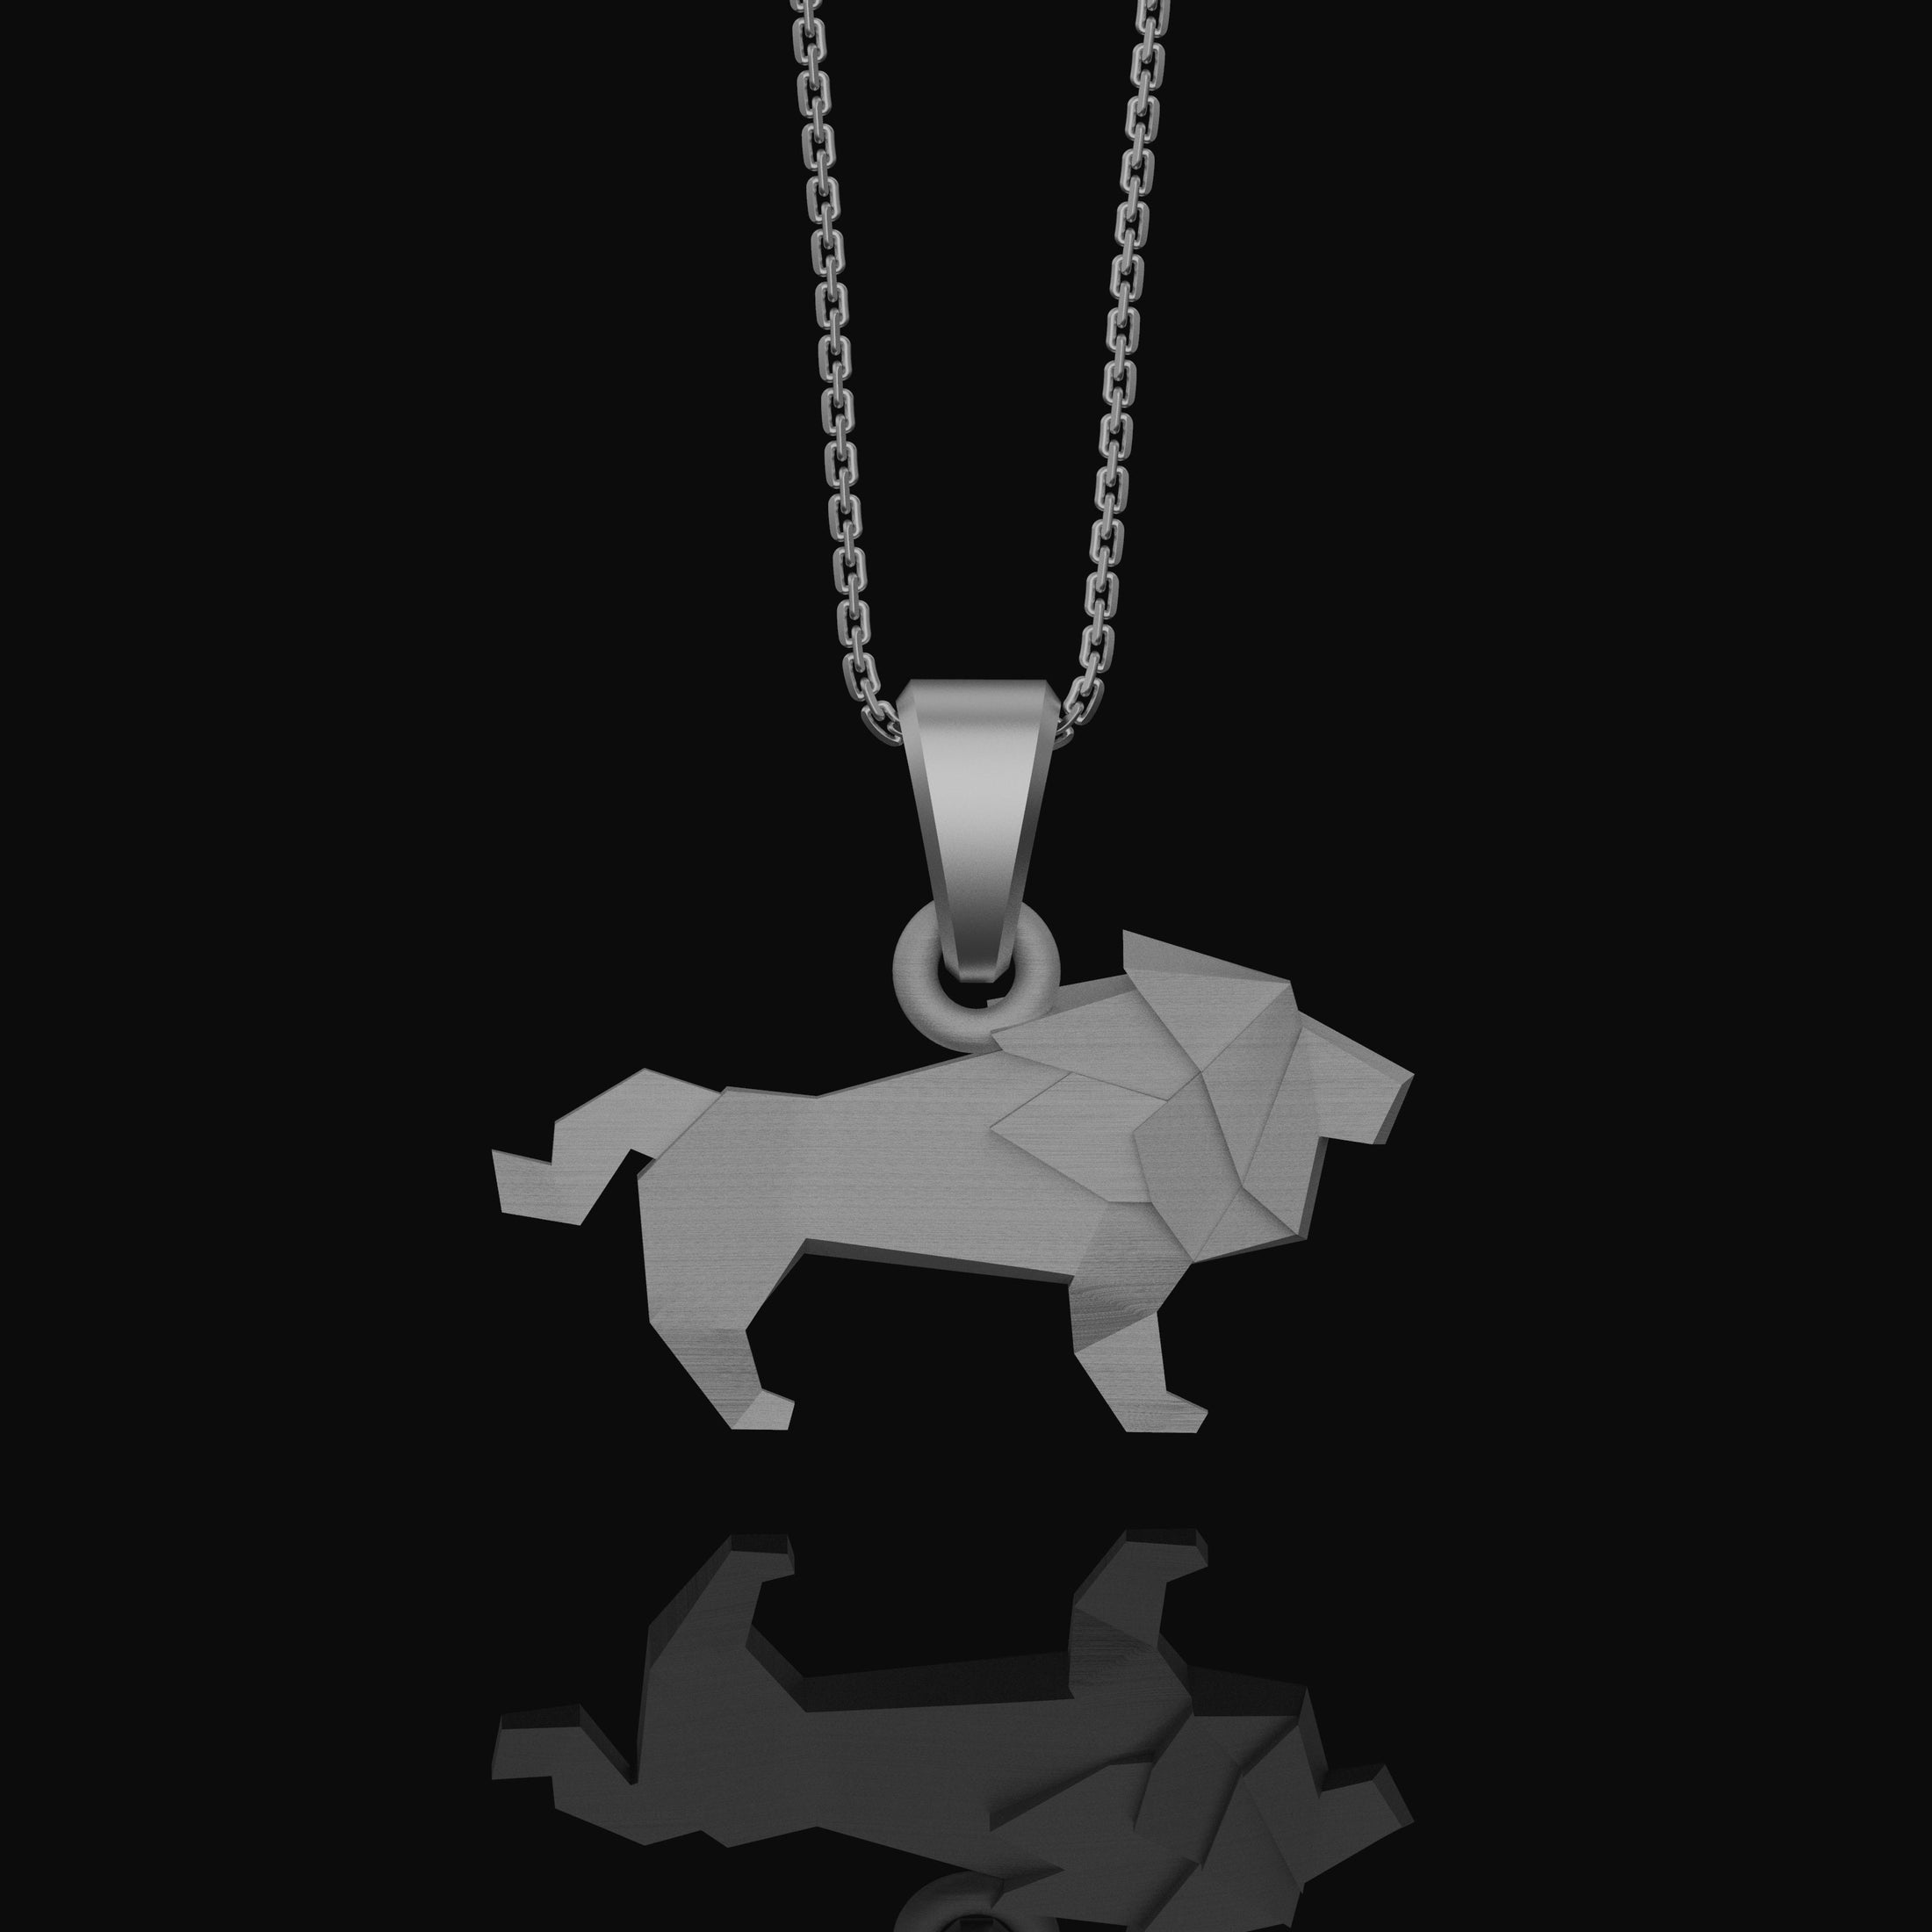 Silver Origami Lion Ring Necklace, Perfect Leo Birthday Gift, Unique Men's Zodiac Jewelry, Symbol of Strength & Courage Polished Matte